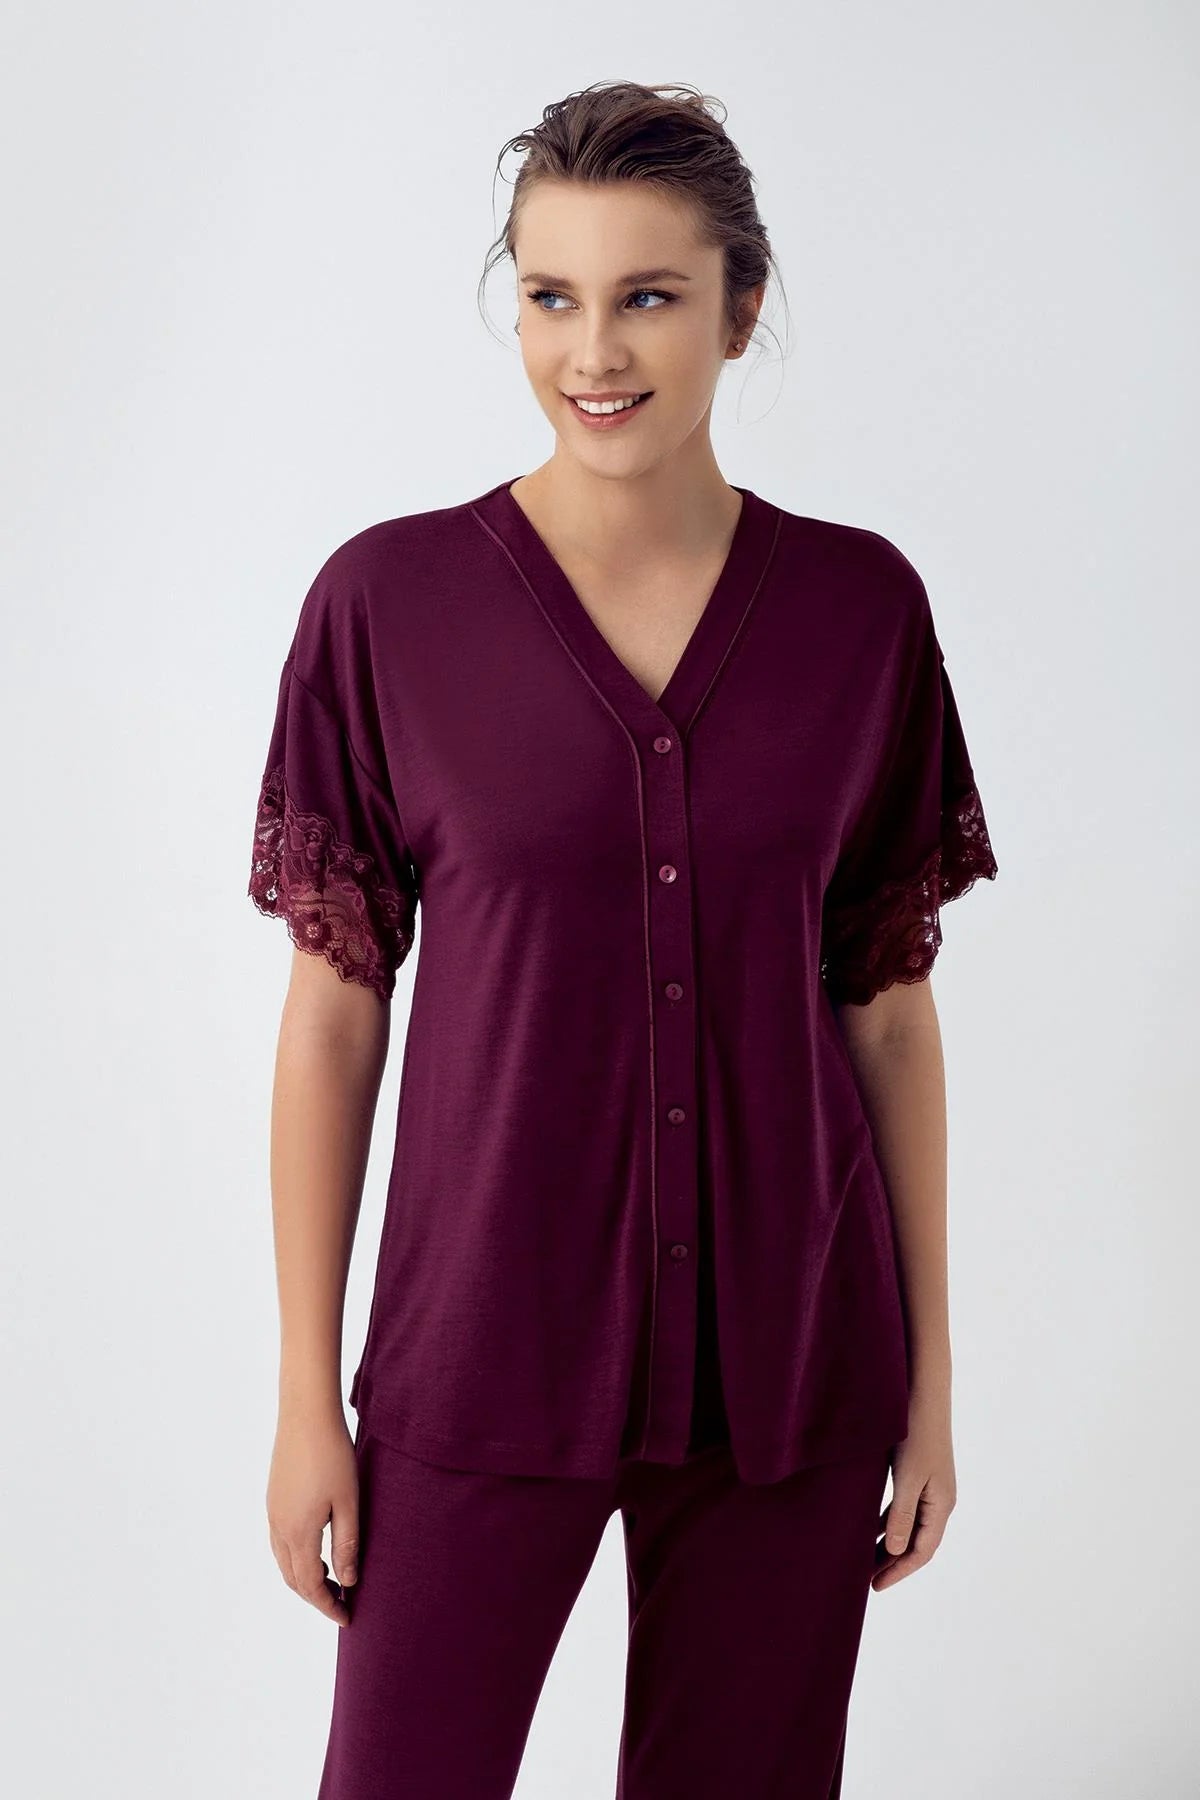 Shopymommy 5776 Lace Sleeve Maternity & Nursing Nightgown With Robe Purple